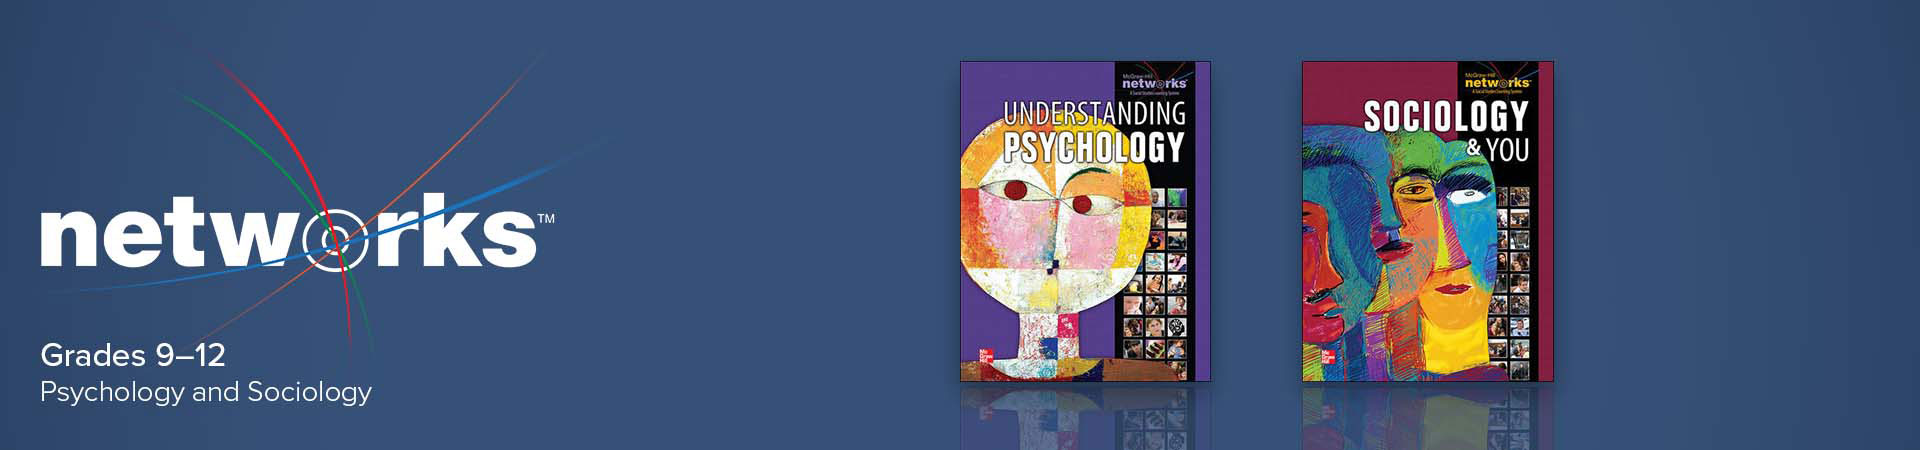 Networks Grades 6-12 Psychology and Sociology